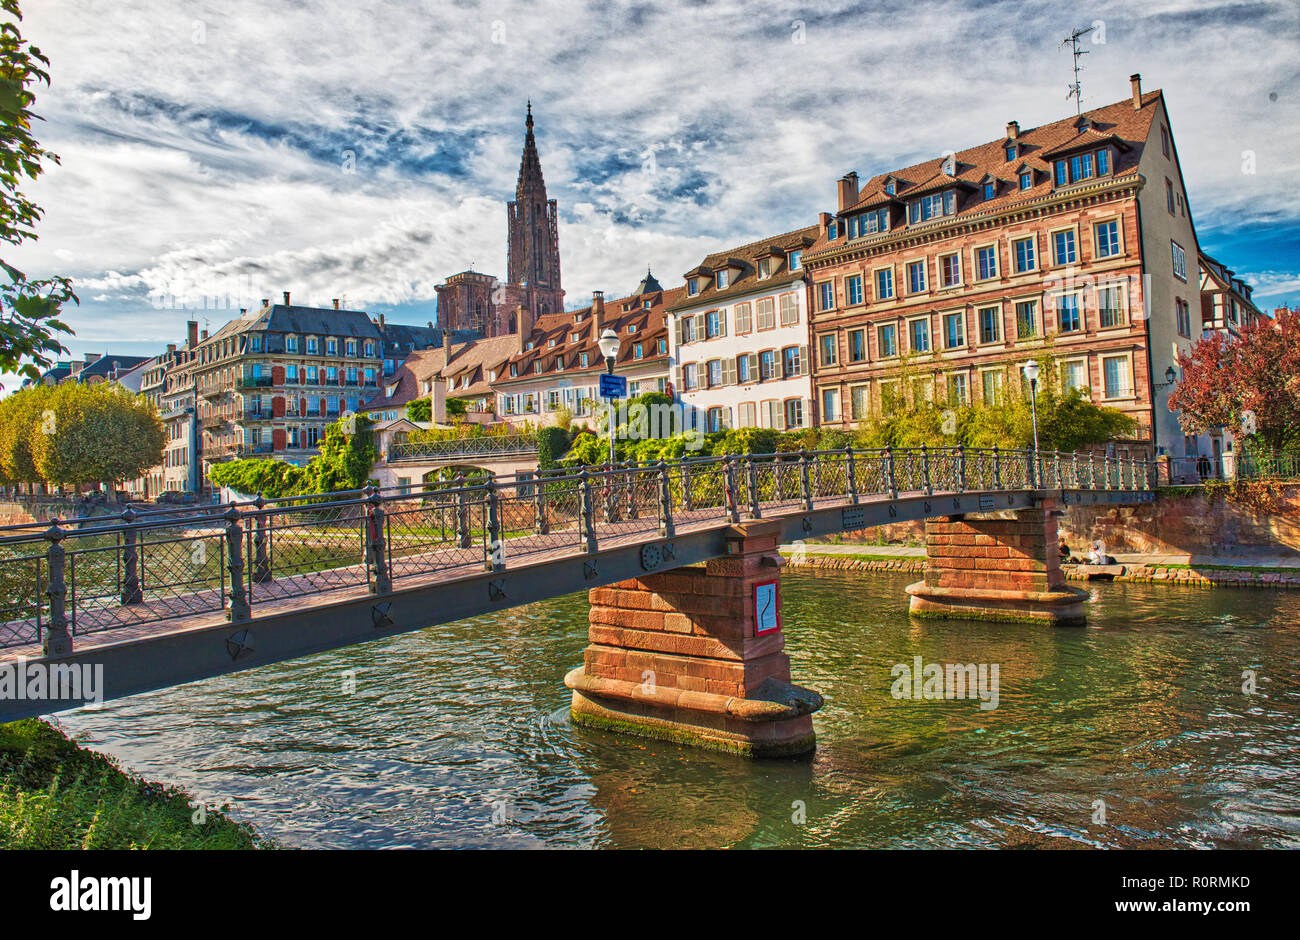 Traditional colorful houses in La Petite France, Strasbourg, France Stock Photo